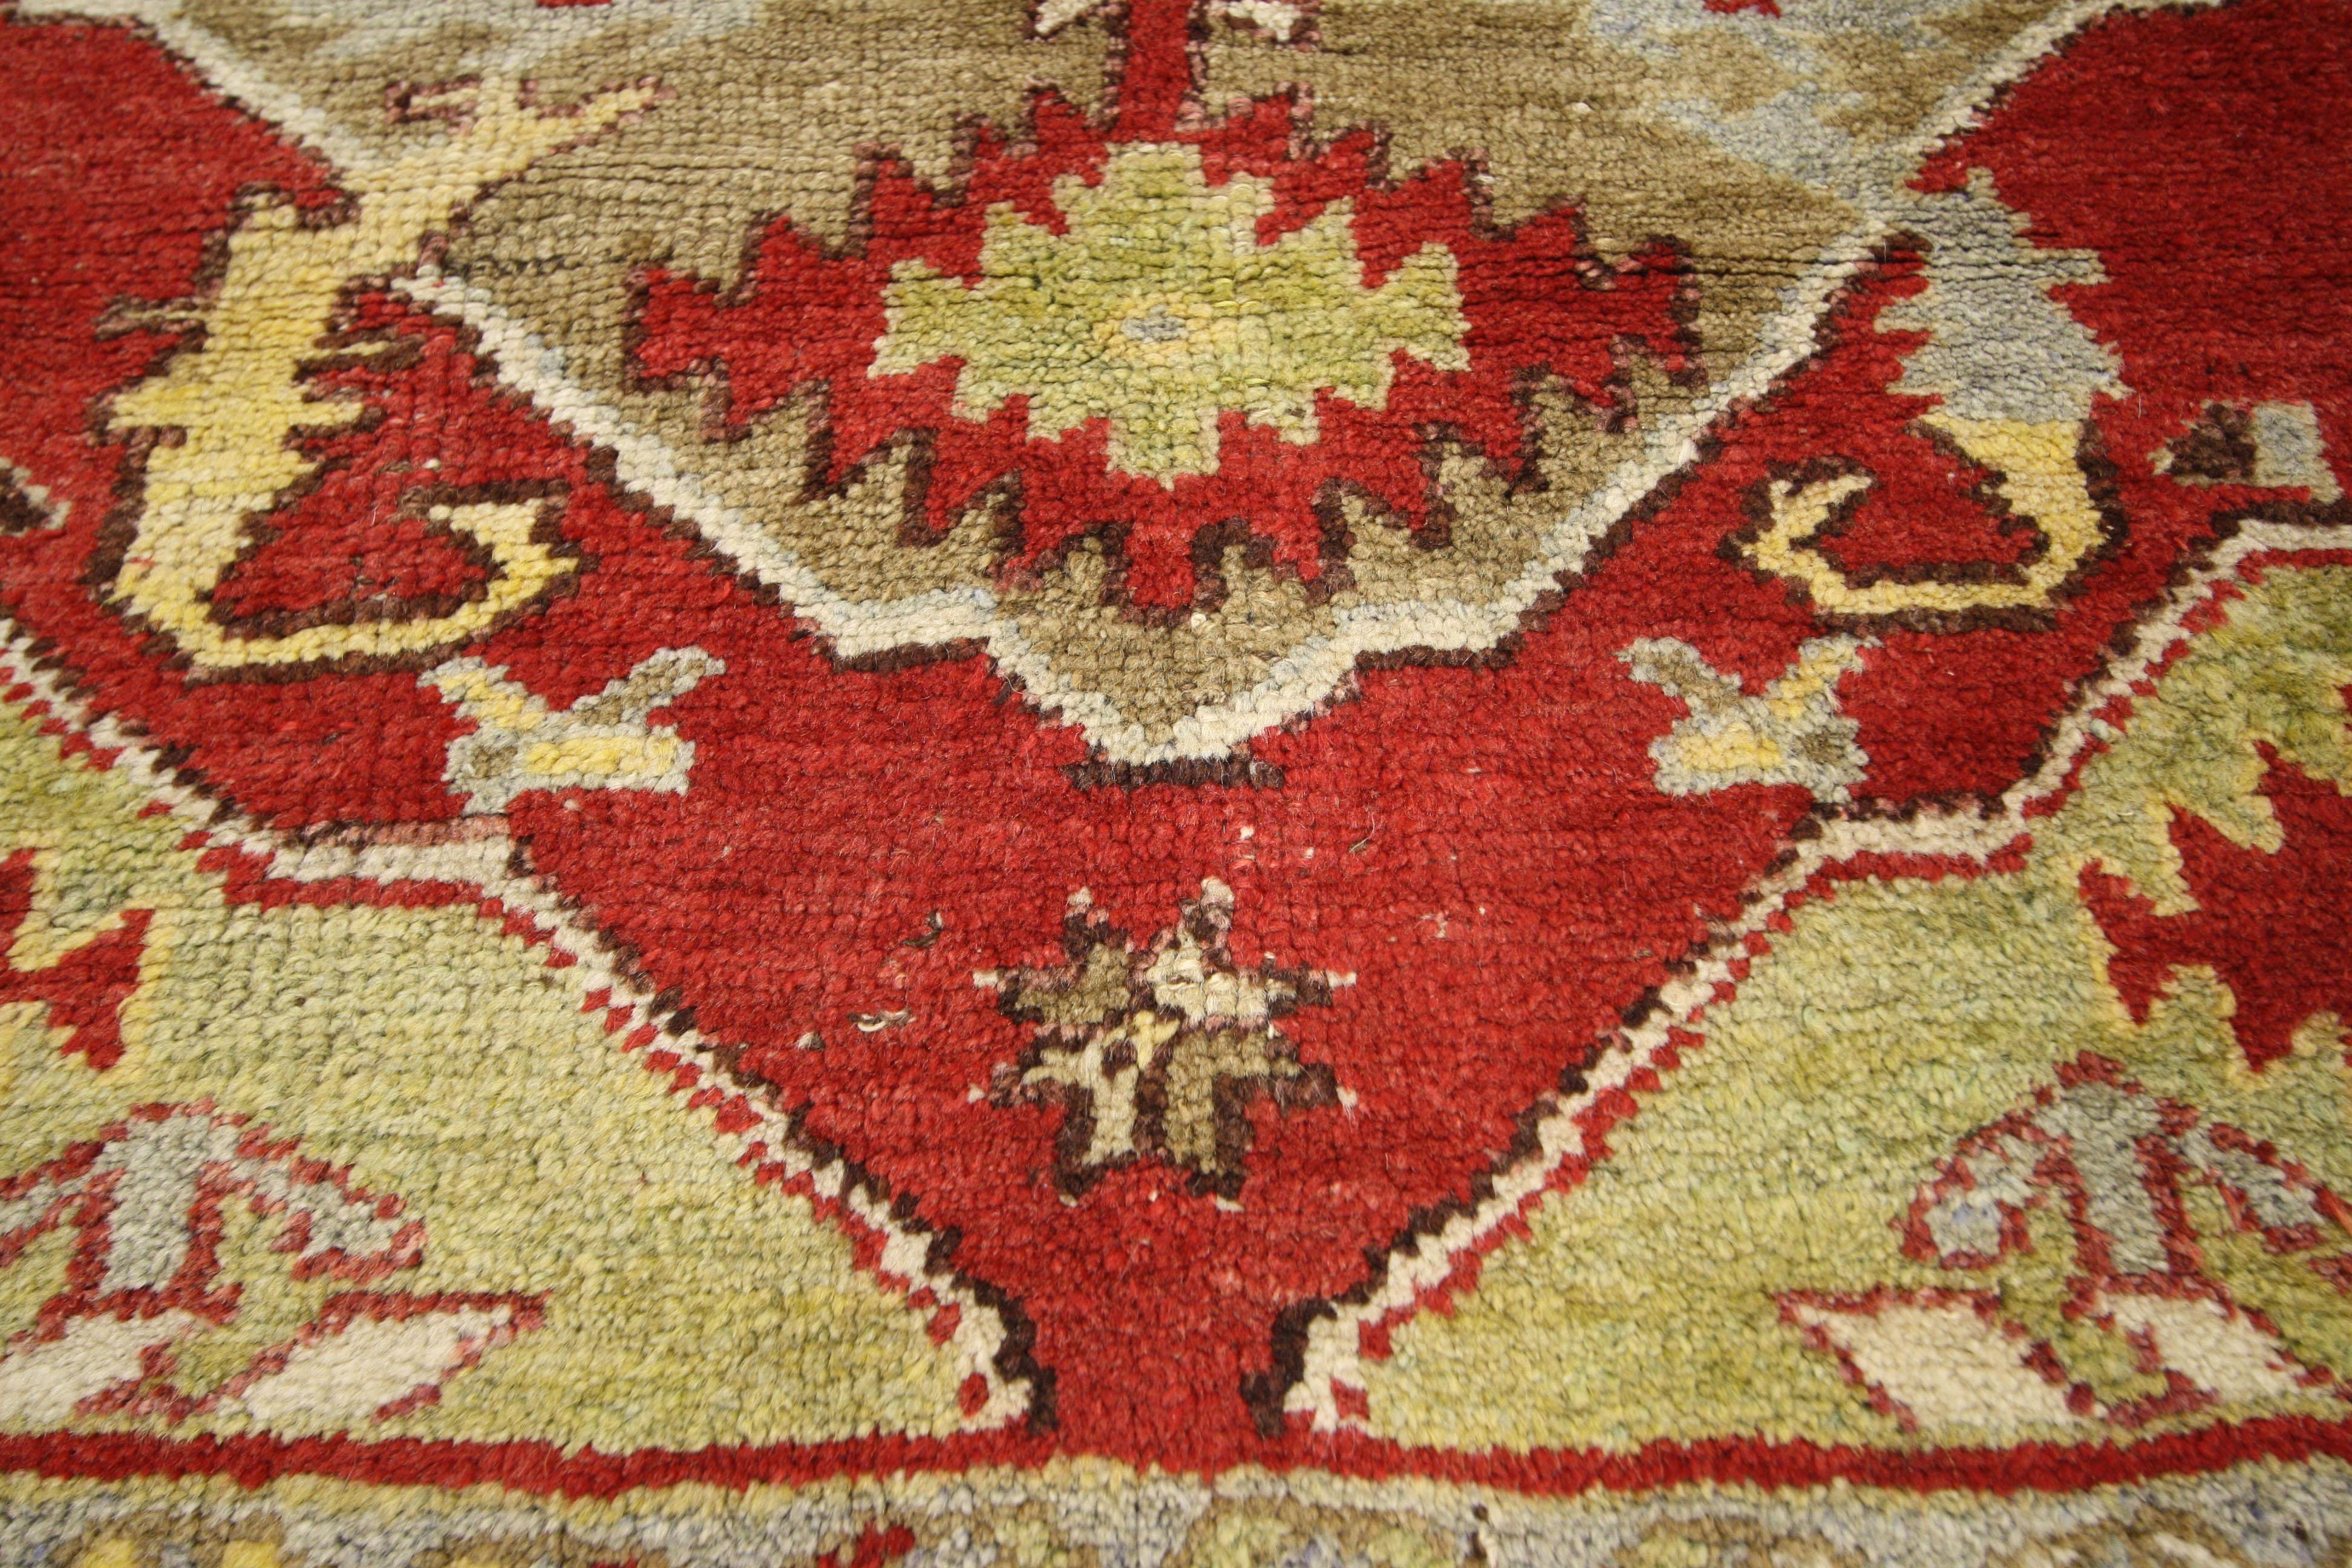 52323, vintage Turkish Oushak rug with Baroque style, small square accent rug. This small hand knotted wool vintage Turkish Oushak rug features an amulet medallion set with joined serrated edge pendants and four curling acanthus leaves that extend